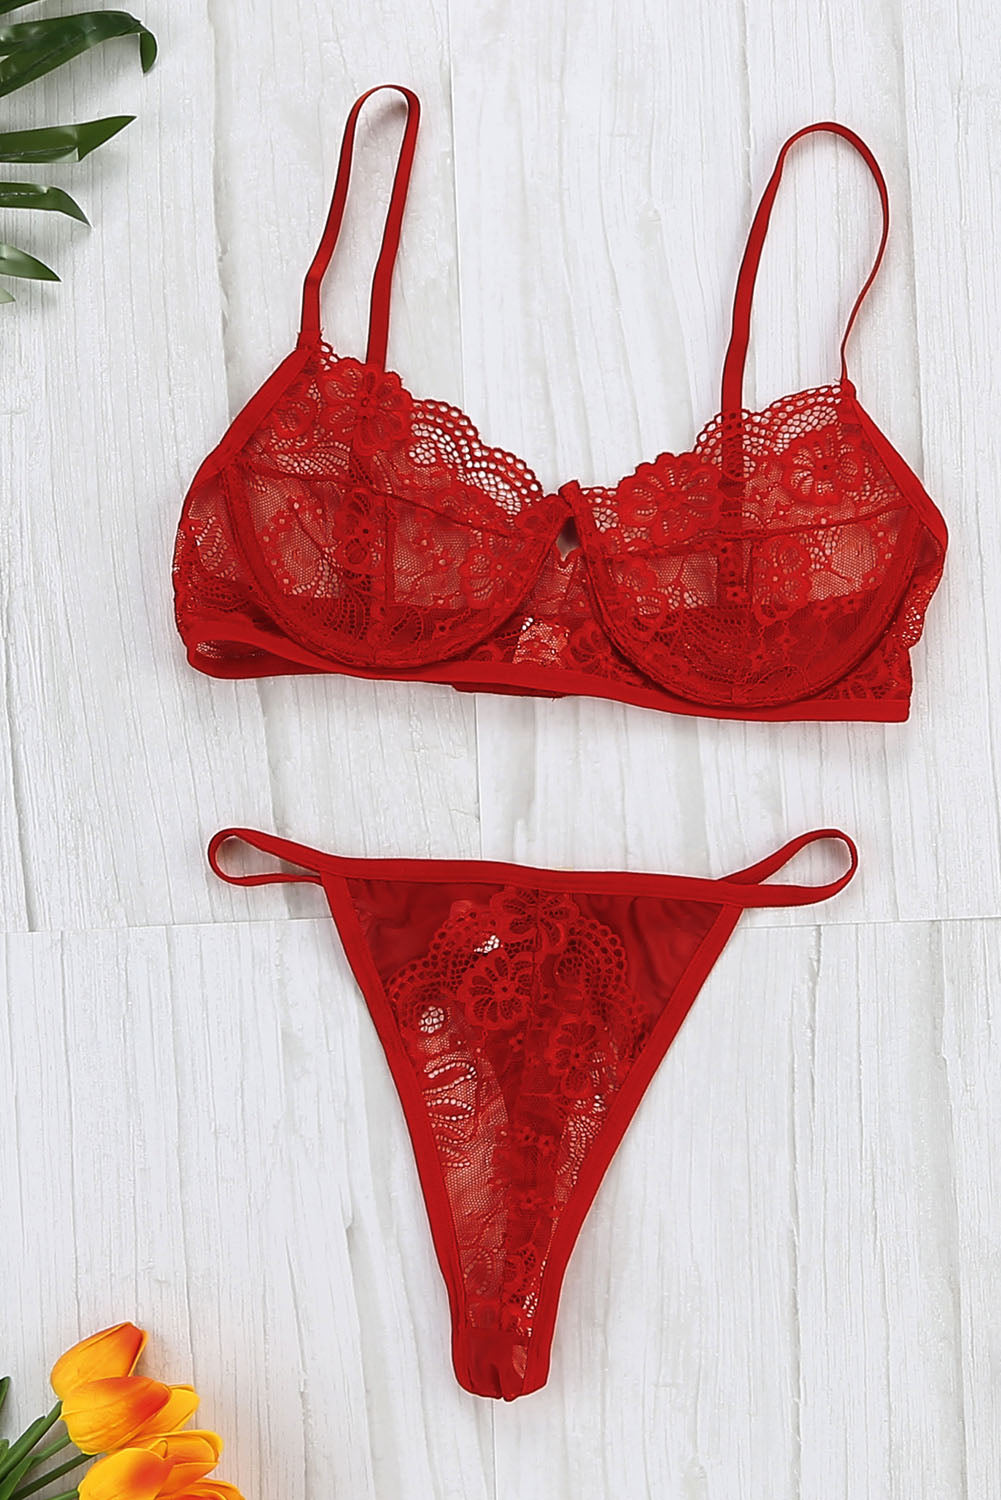 Beestung Lingerie  Red hot. This stunning lacy bra brings the